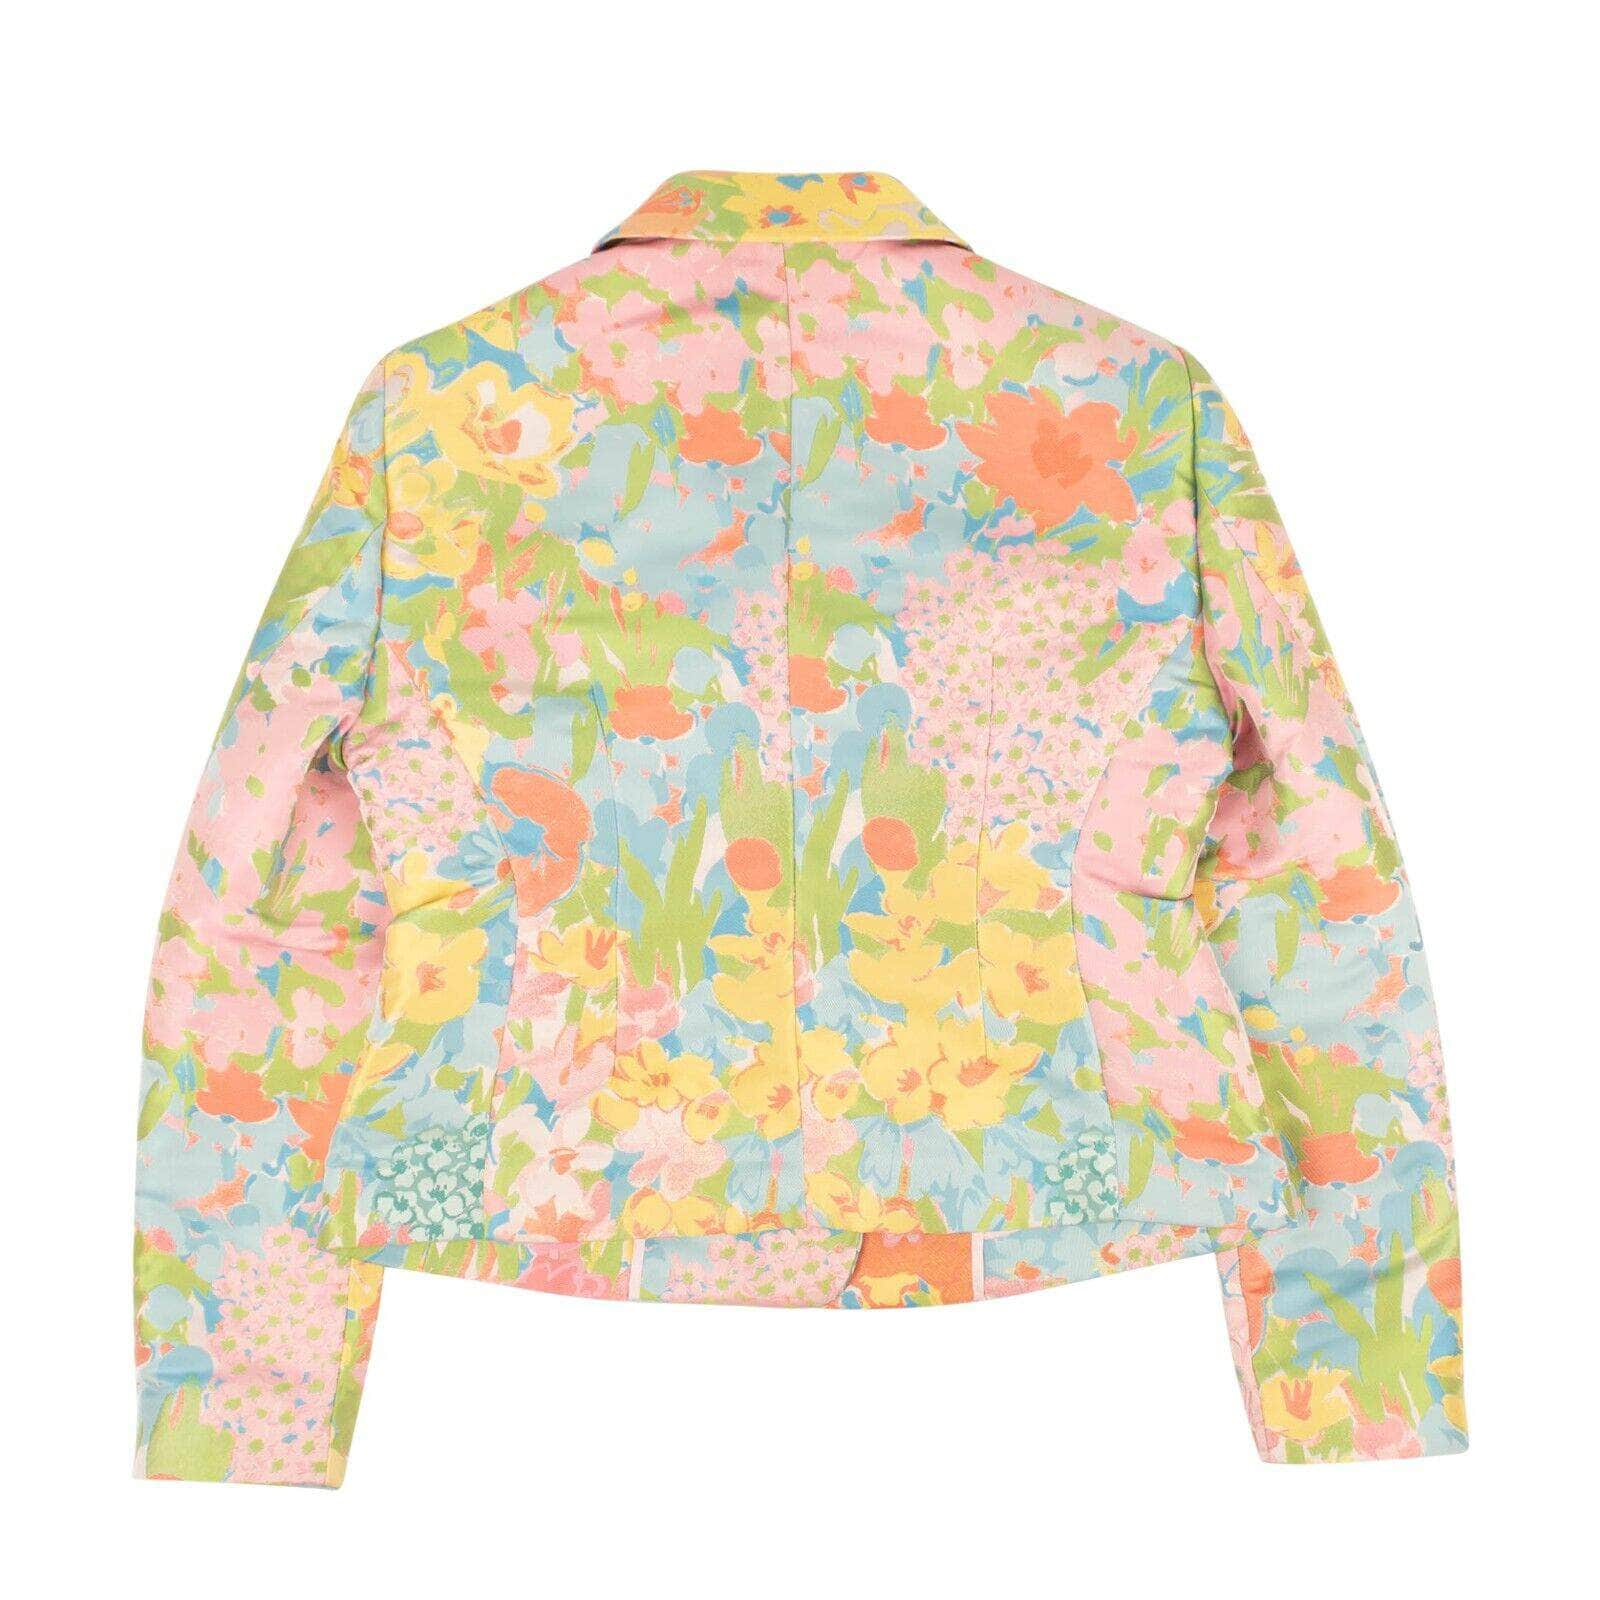 BOUTIQUE MOSCHINO 250-500, boutique-moschino, channelenable-all, chicmi, couponcollection, gender-womens, main-clothing, size-42, size-44, size-46, womens-jackets-blazers Multi Spring Floral Evening Short Jacket